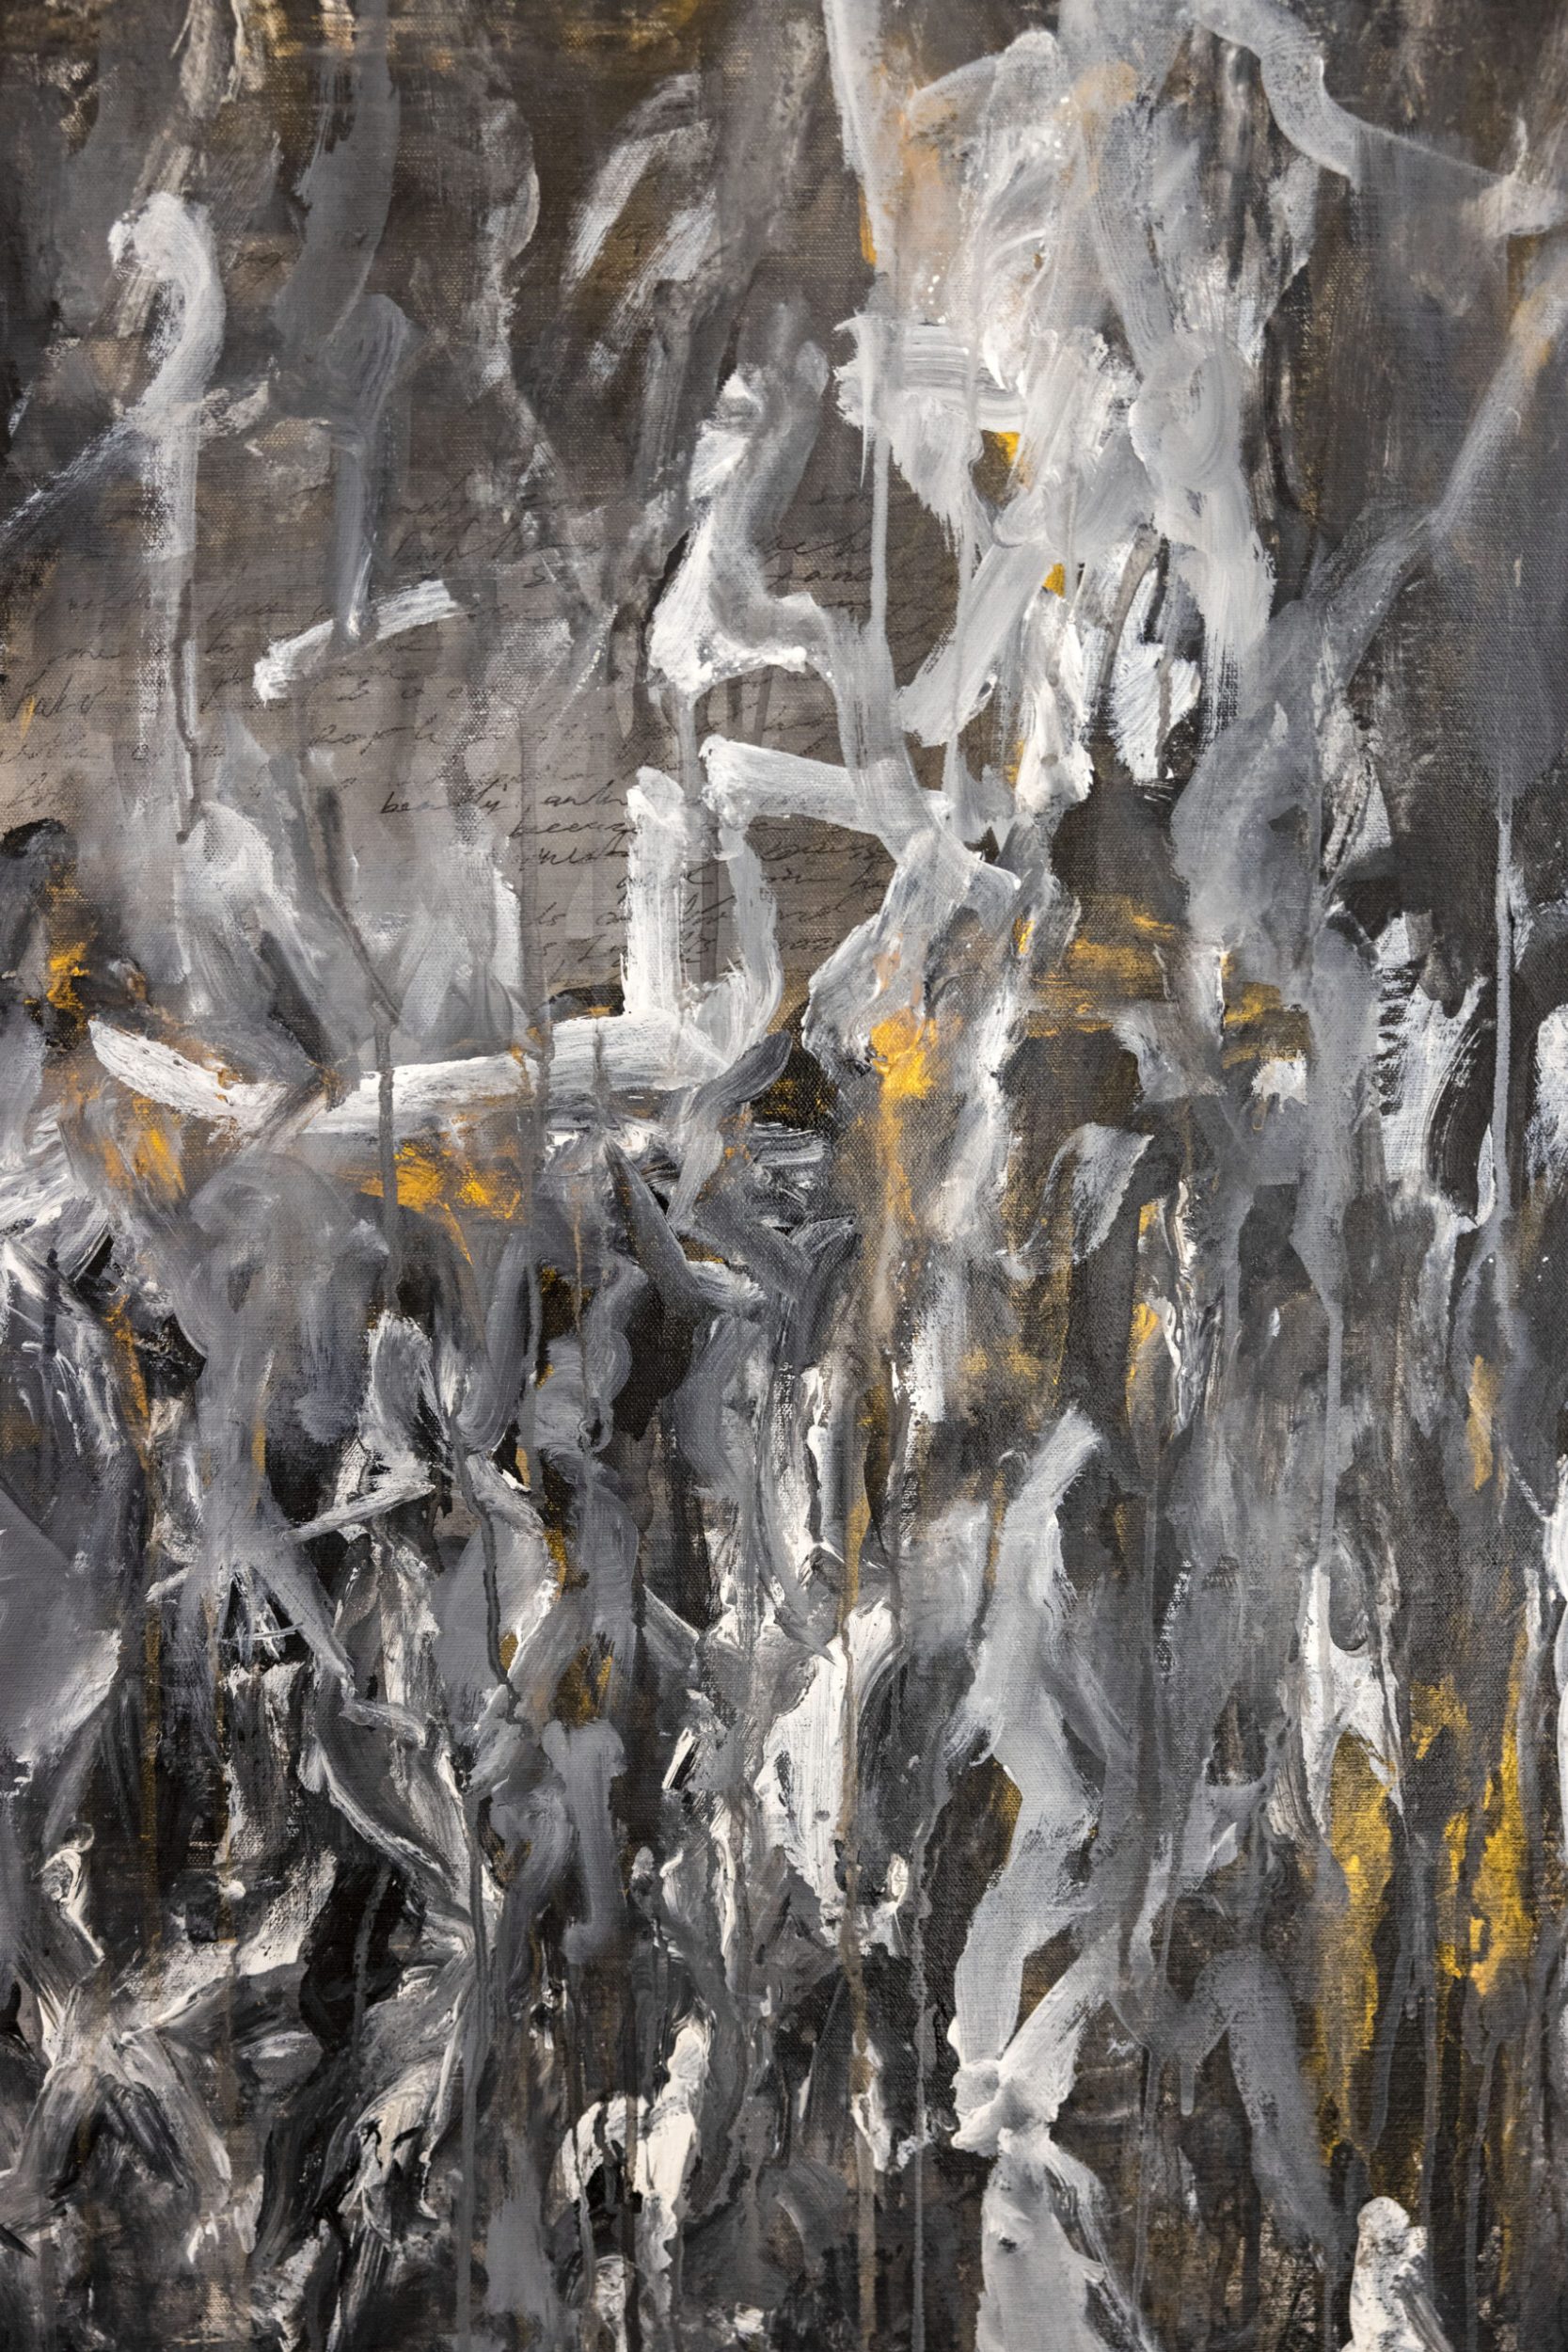 Abstract black, white, grey and yellow painting by Zara Renton